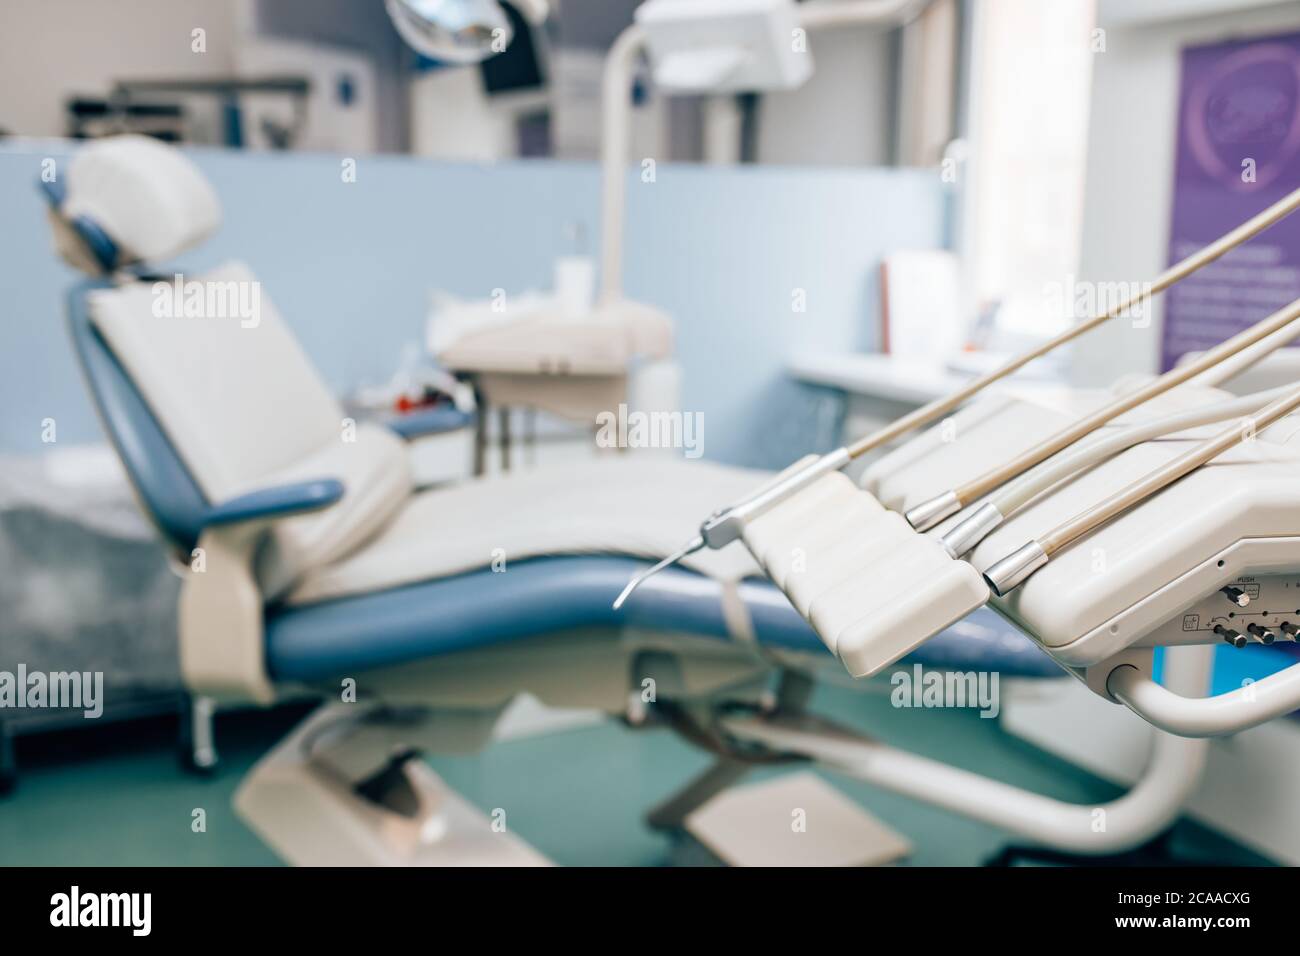 special equipment for teeth exam and treatment in dental office, medical instruments. Orthodontics, medicine concept Stock Photo